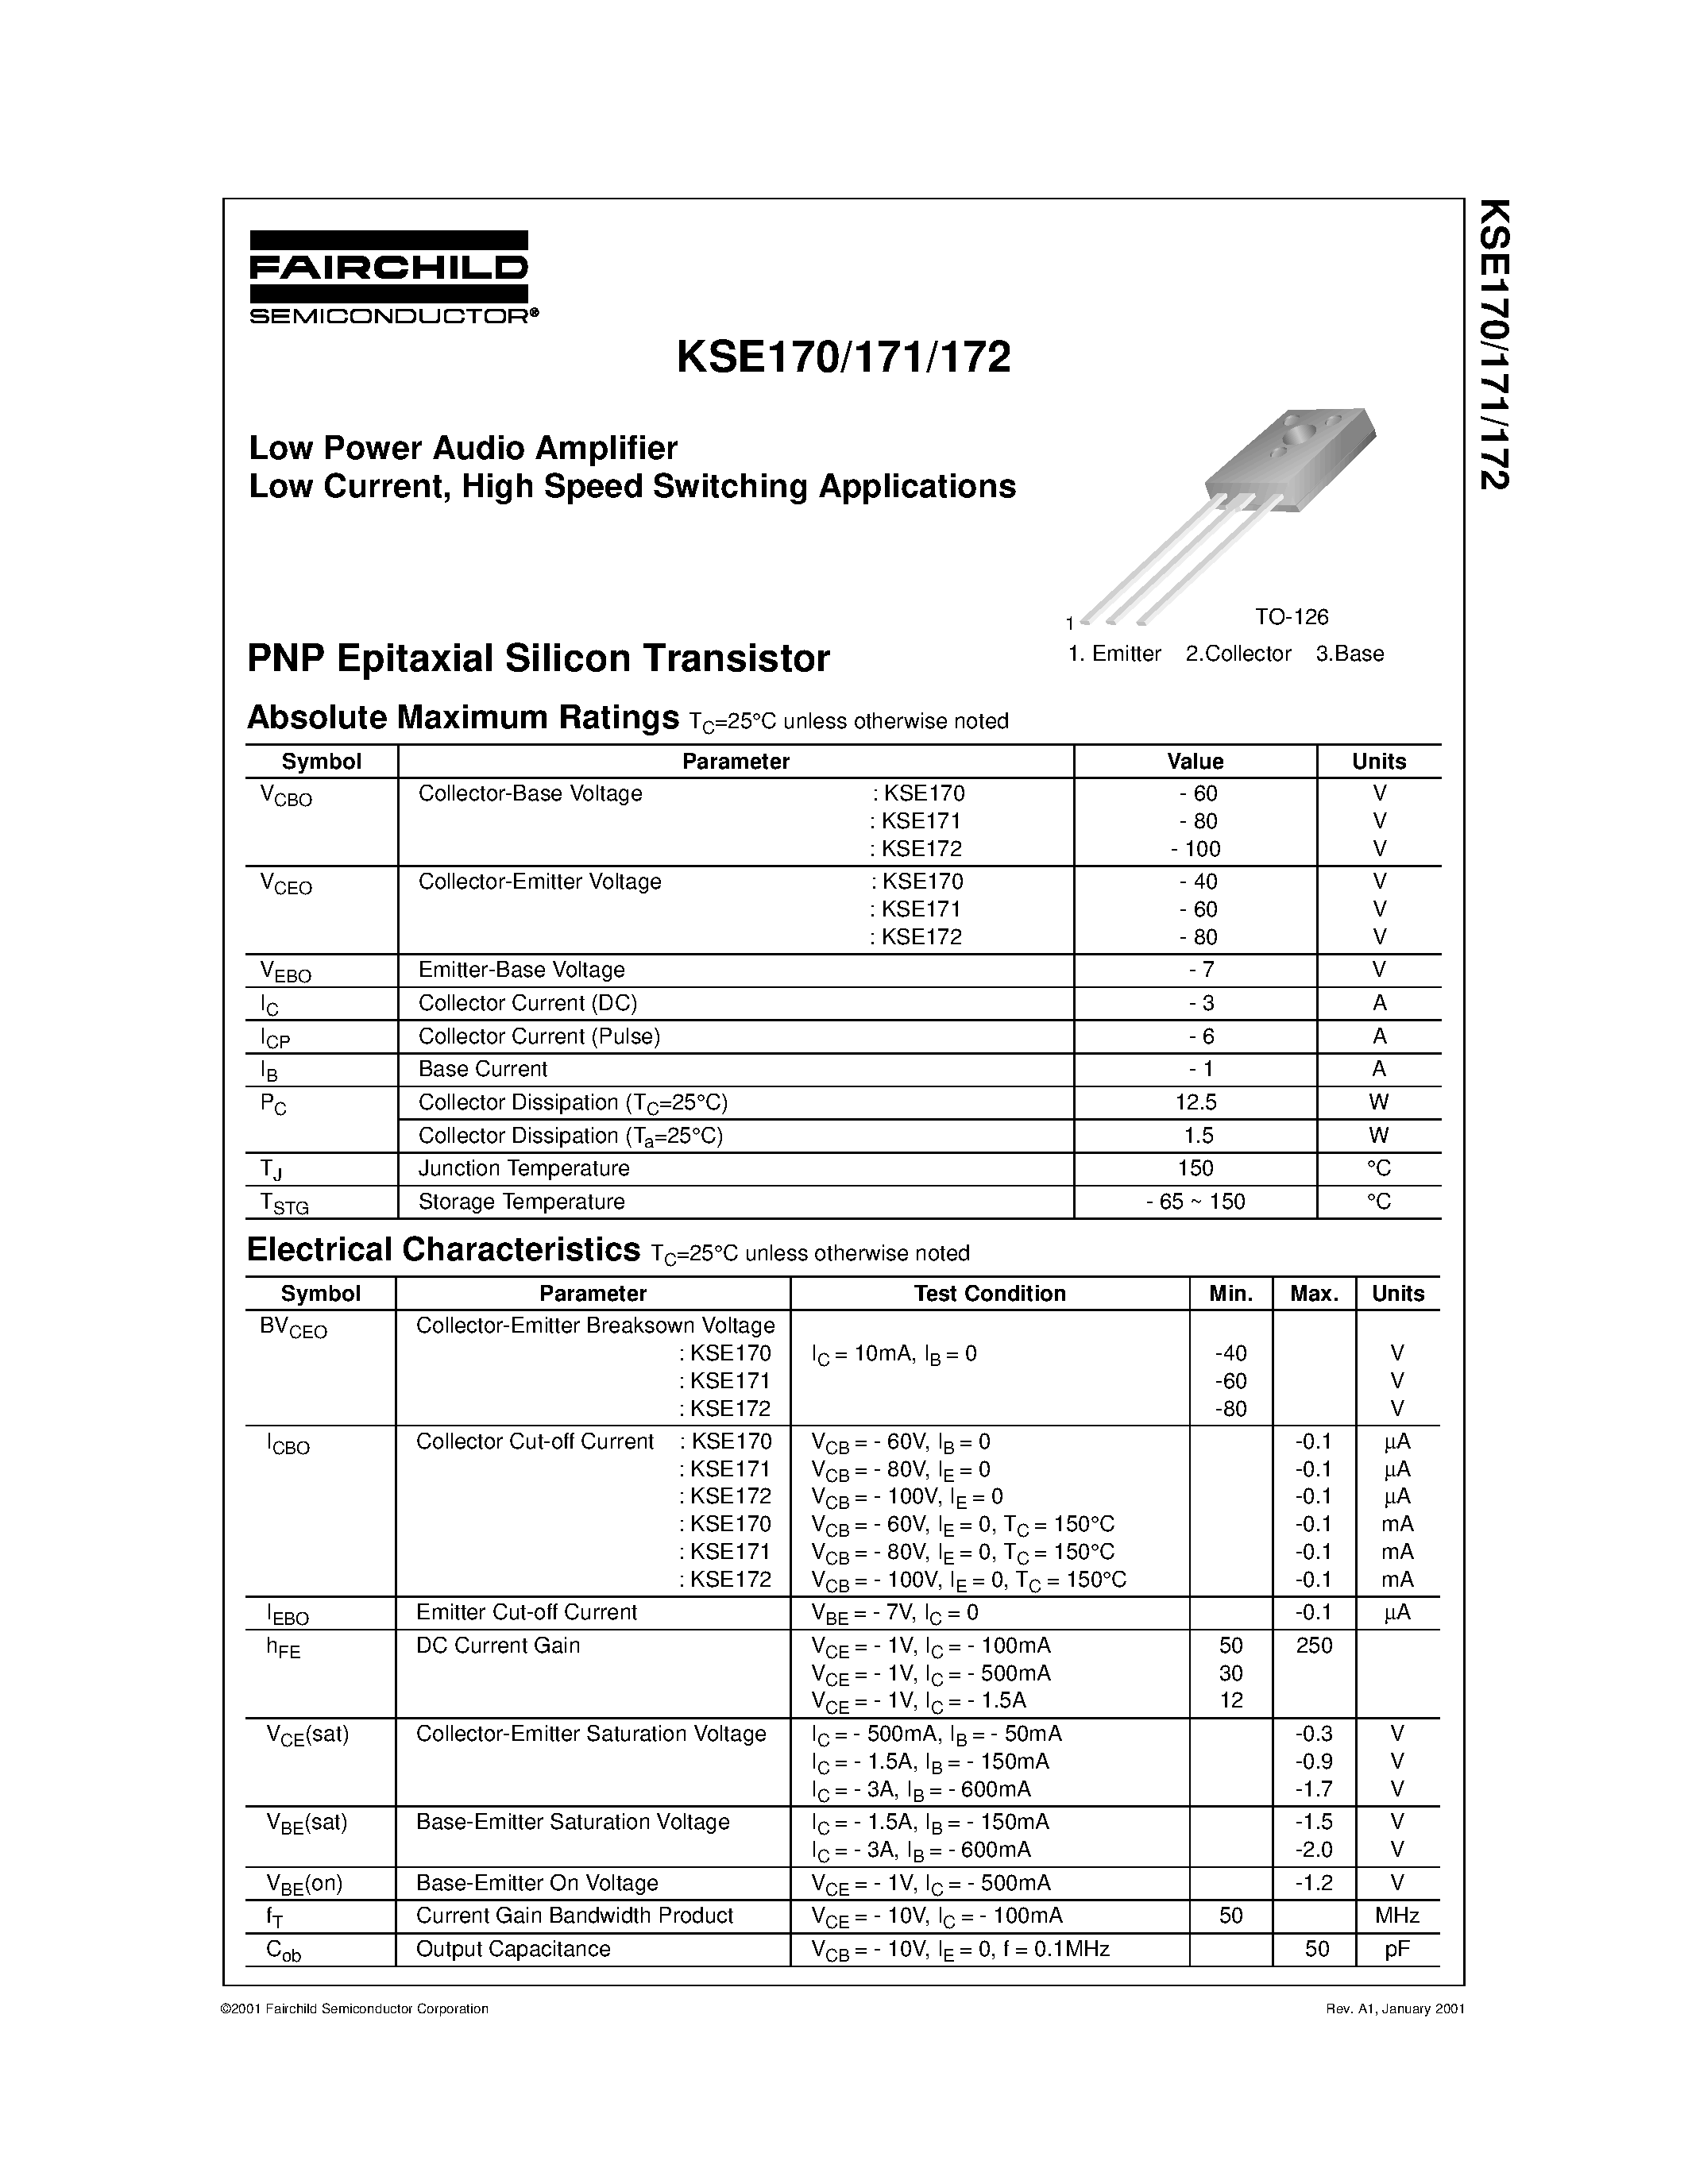 Datasheet KSE171 - Low Power Audio Amplifier Low Current/ High Speed Switching Applications page 1